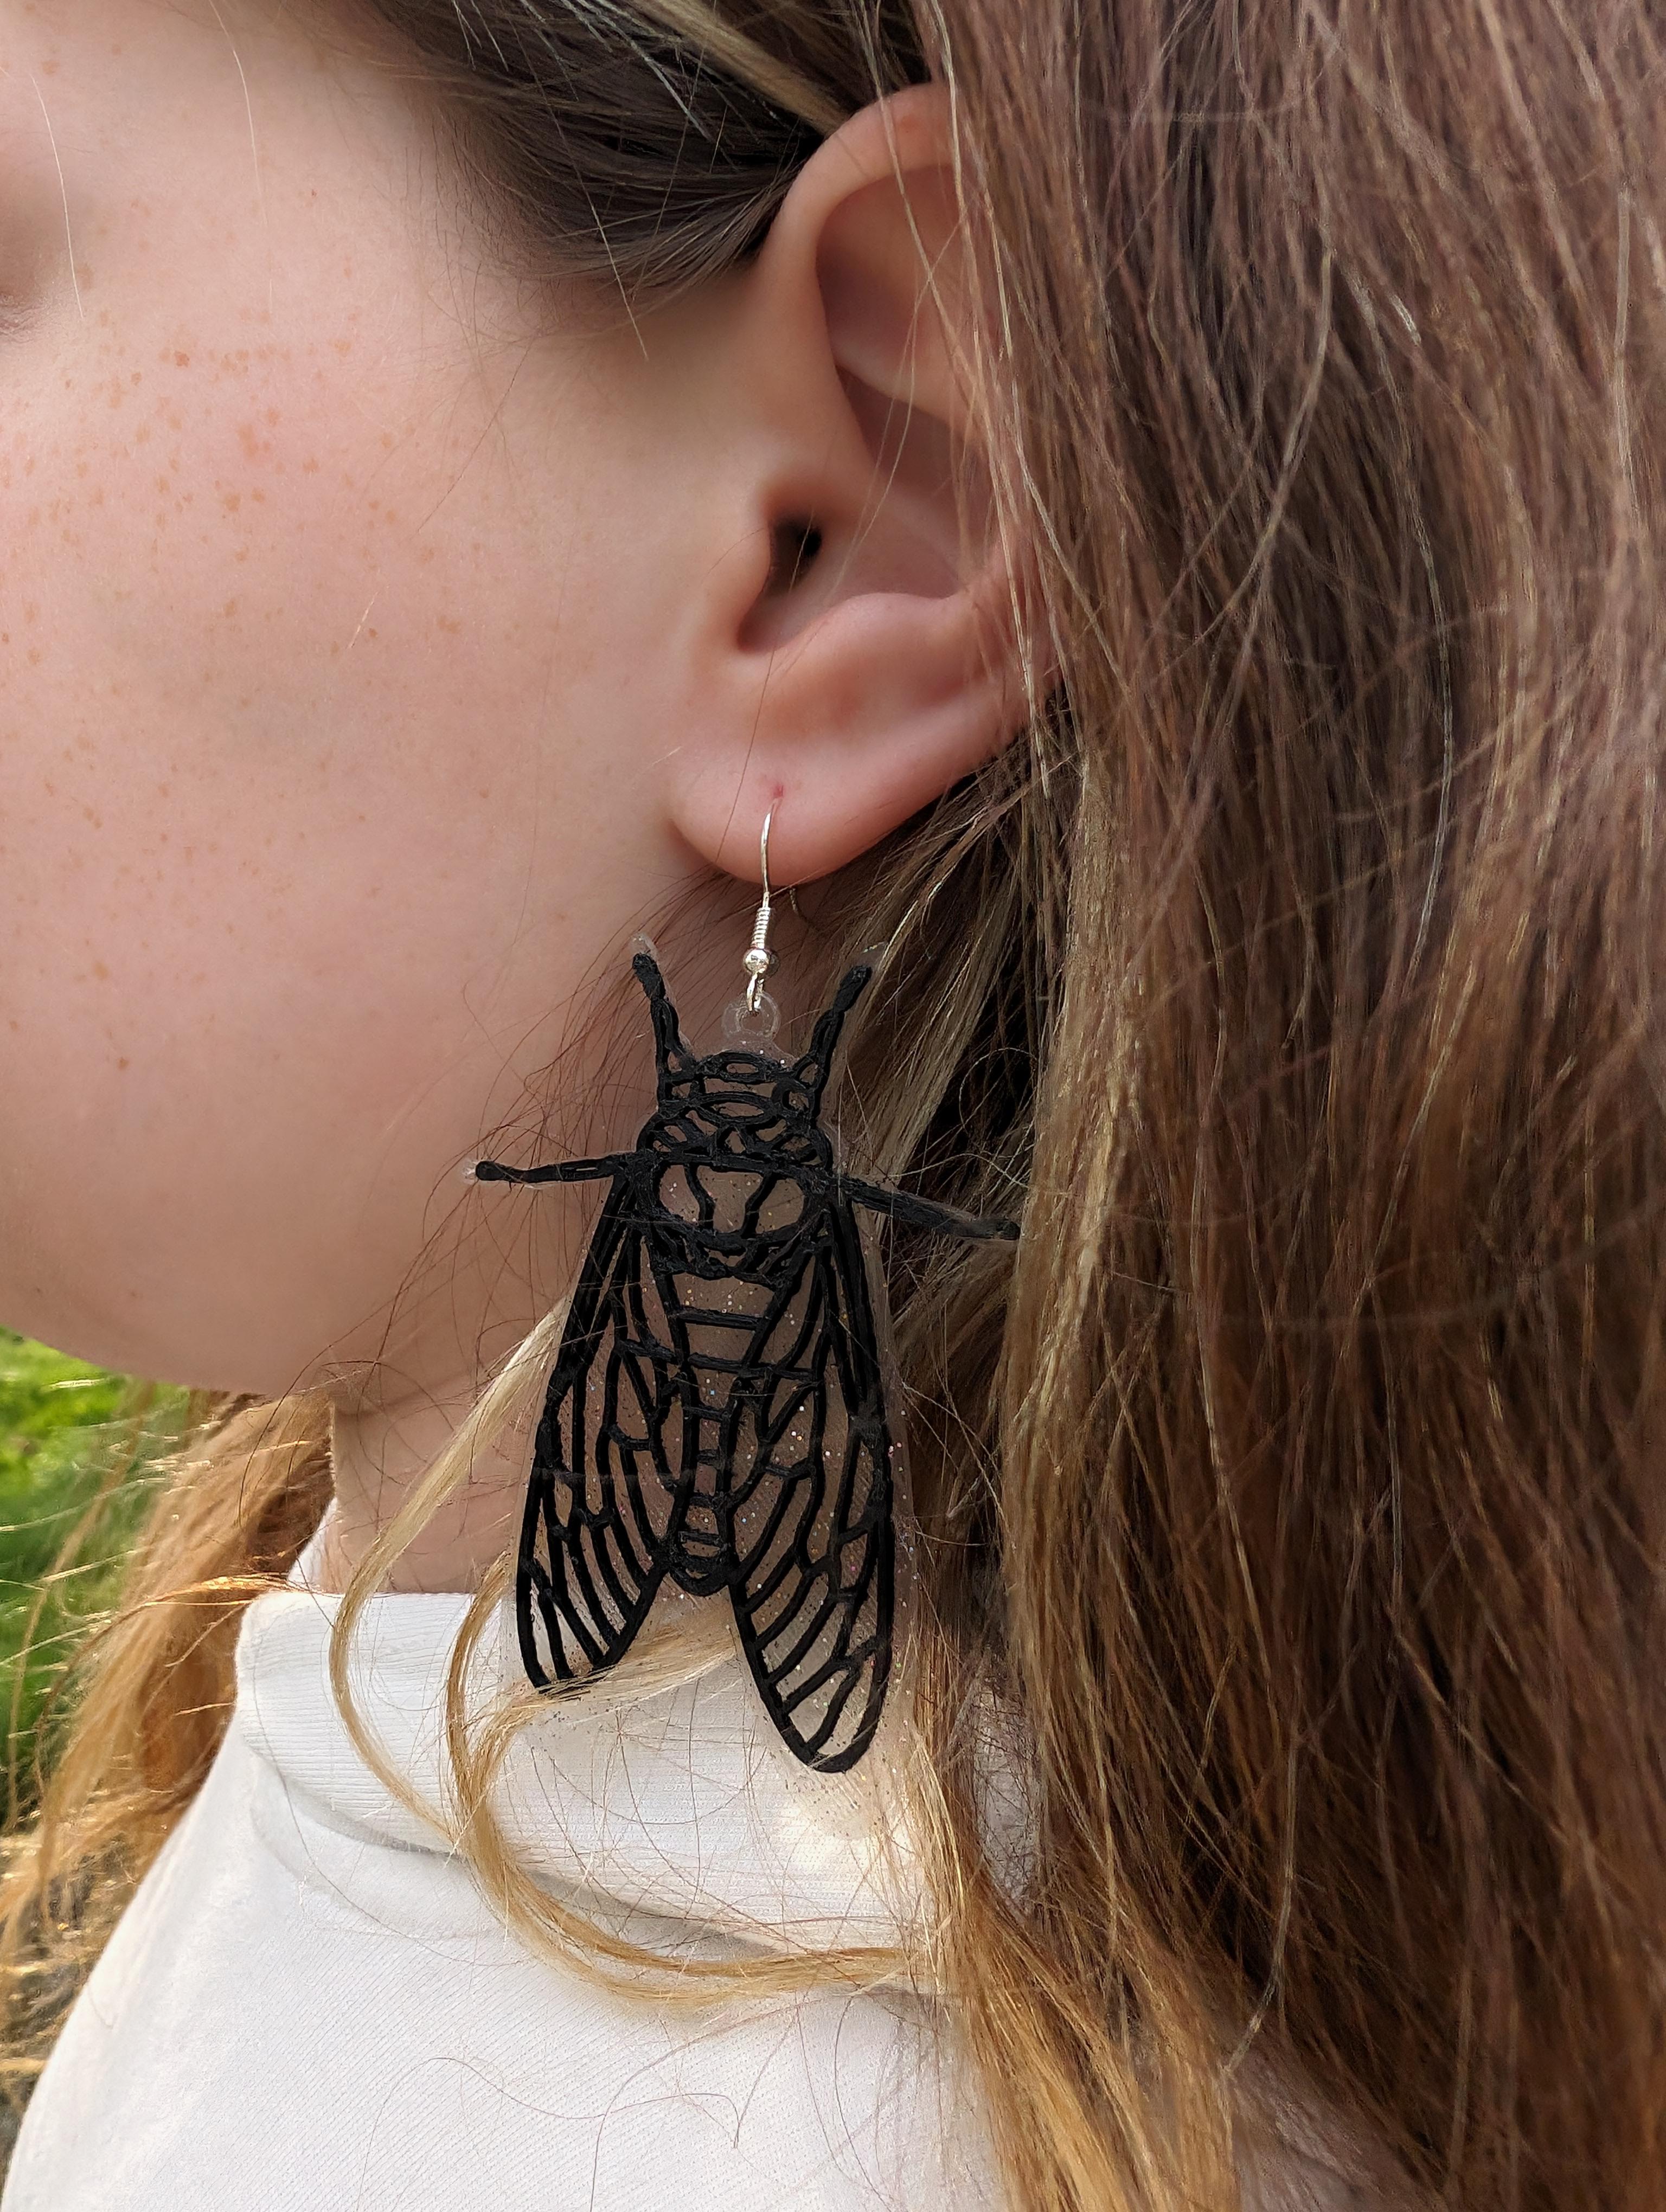 Cicada invasion earrings - easy 2-color printing with filament change, entomology pendant, jewelry  3d model